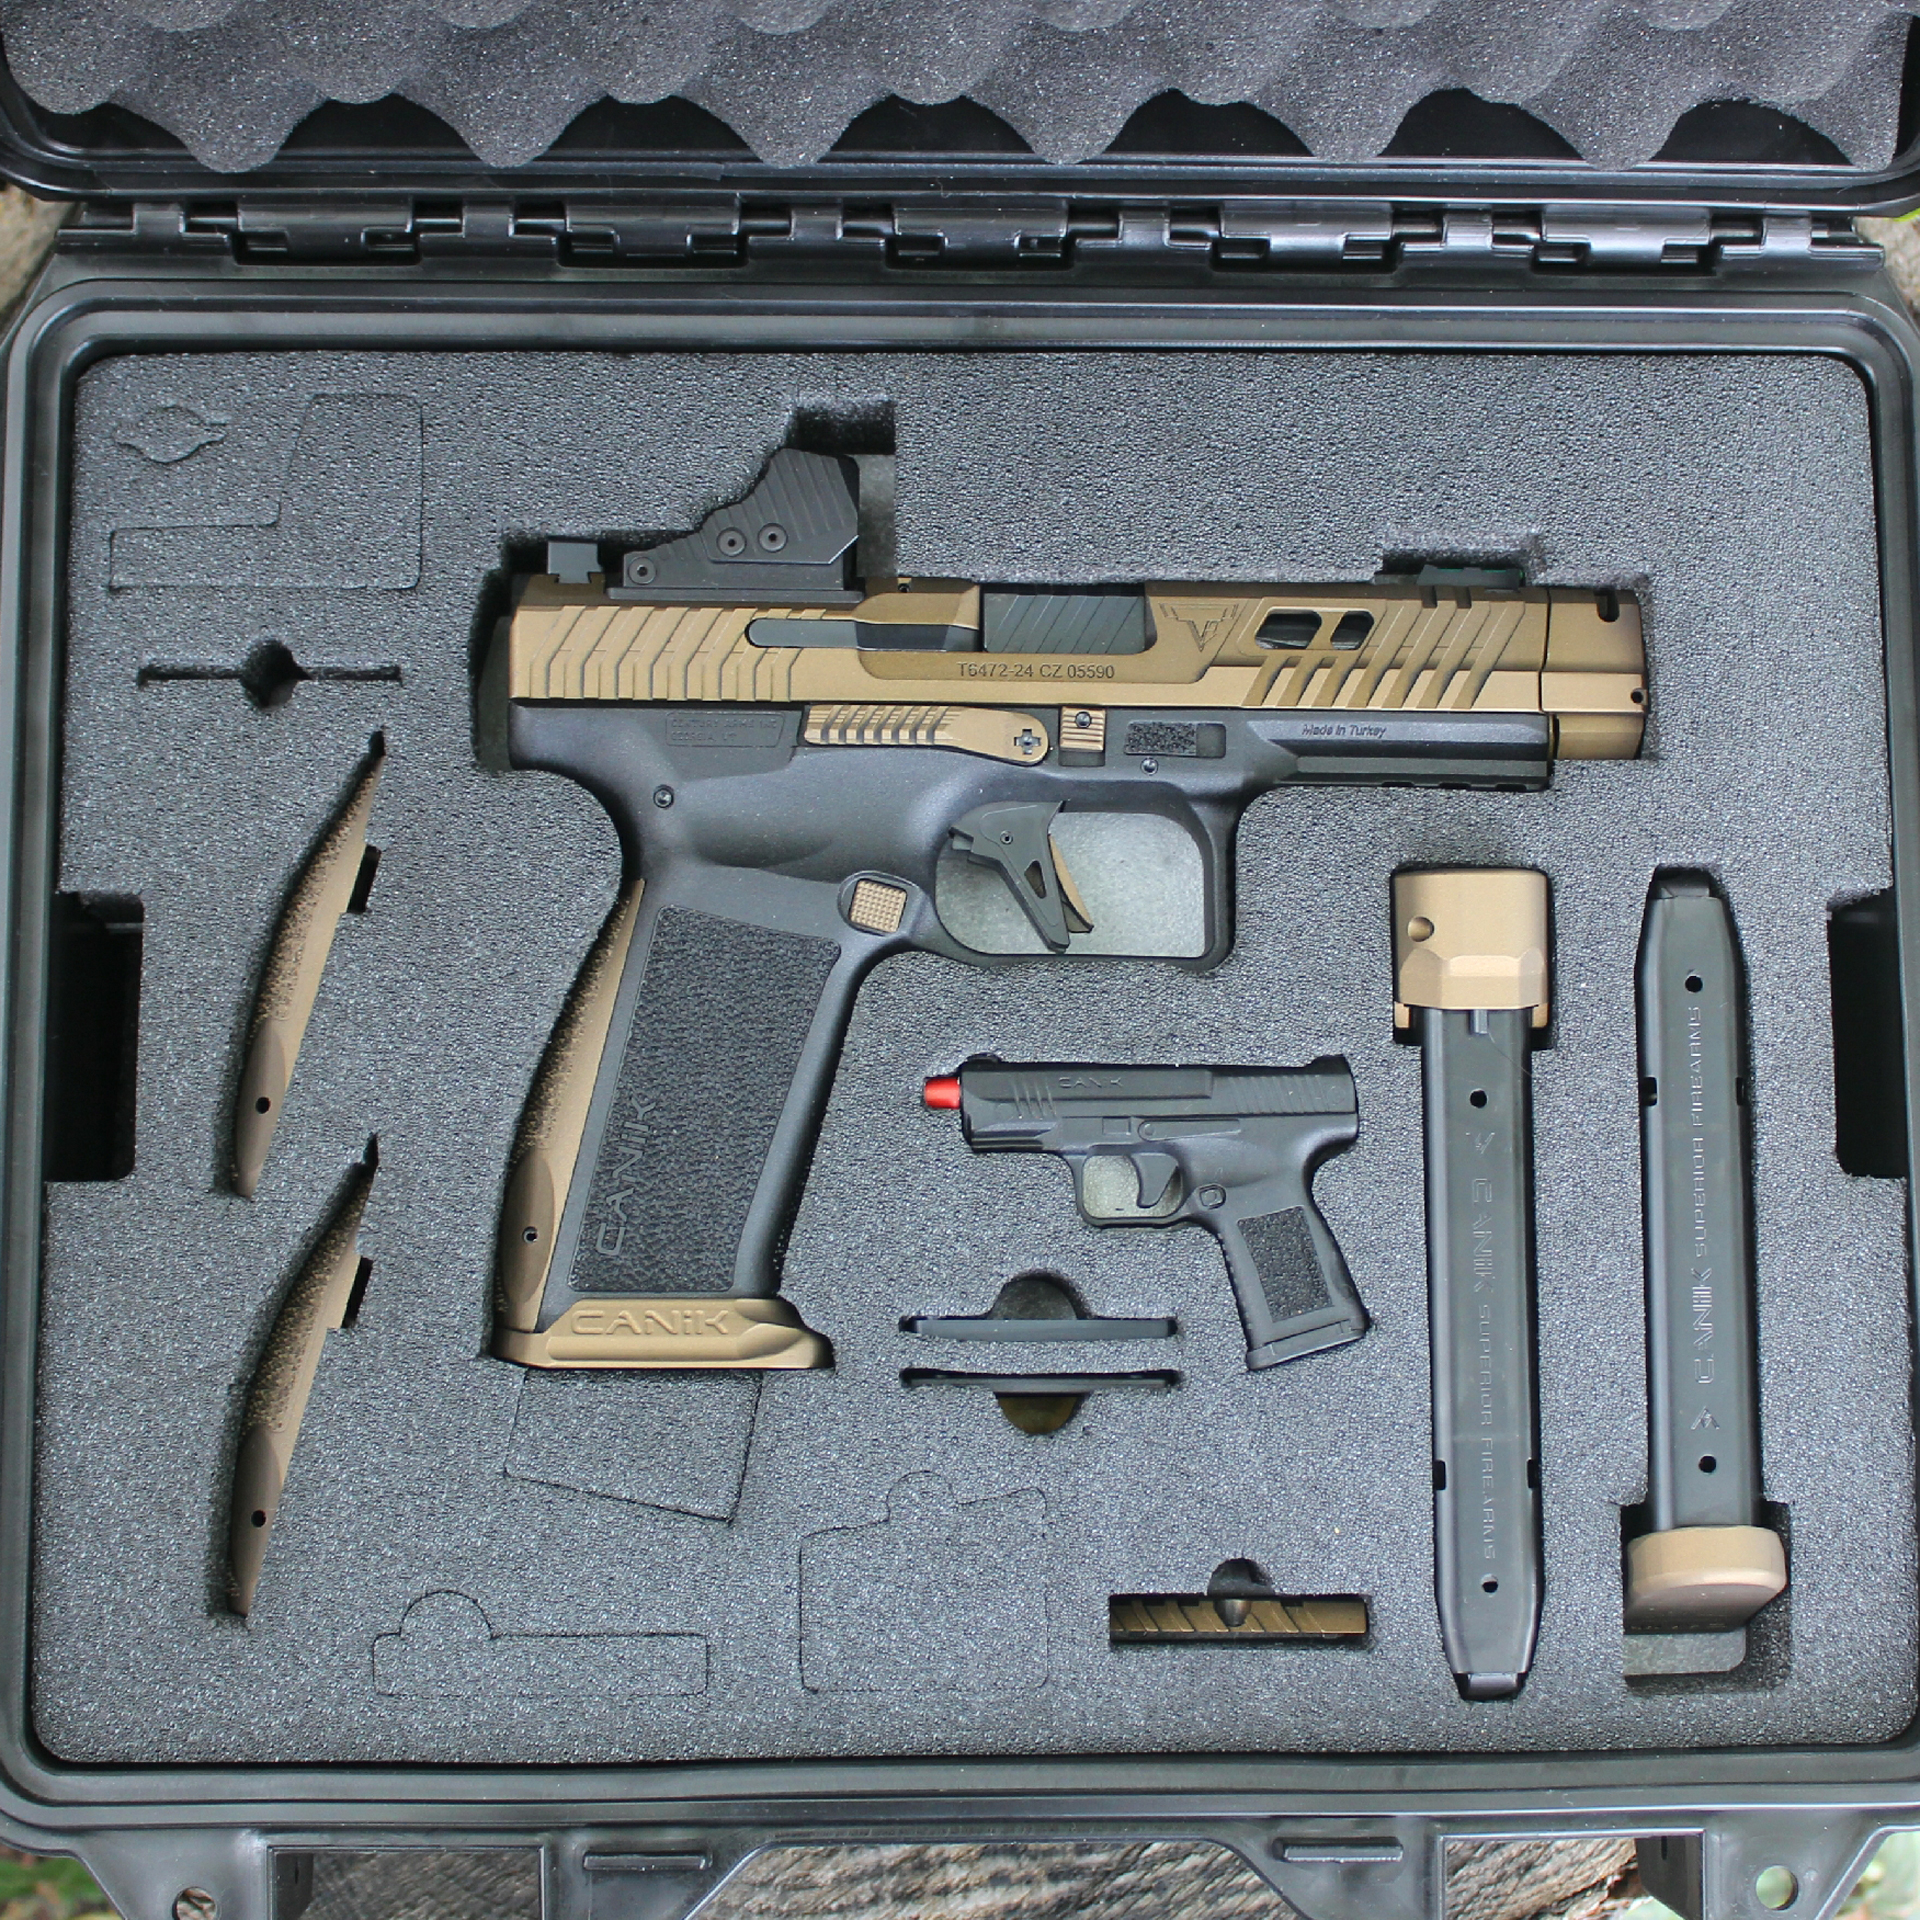 Century Arms Canik TTI Combat 9 mm pistol shown in case with accessories